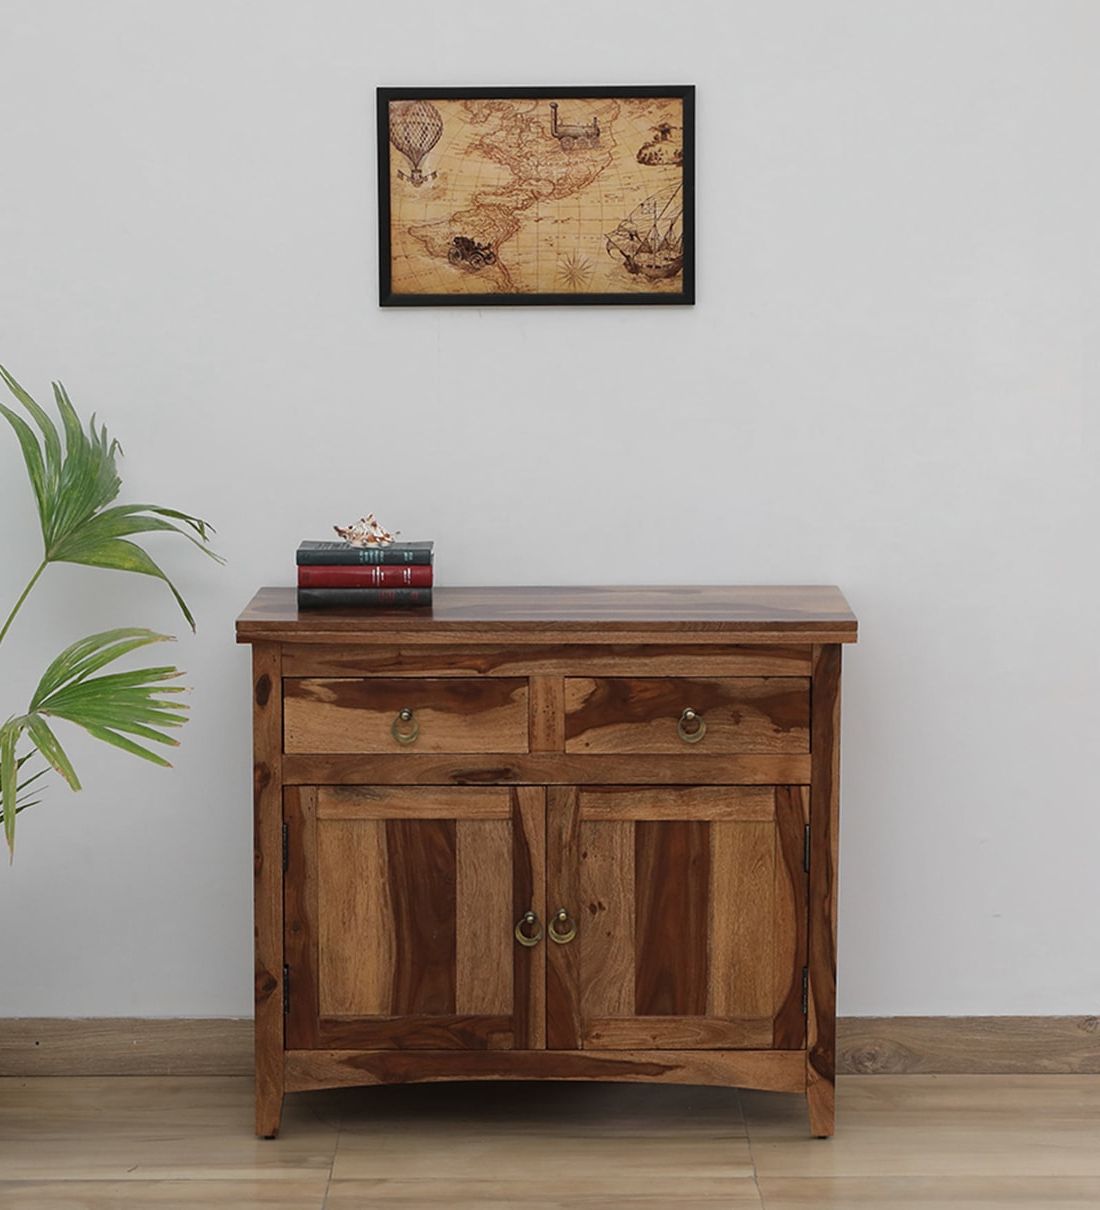 [%buy Biscay Sheesham Wood Sideboard In Scratch Resistant Rustic Teak Finish  At 2% Offwoodsworth From Pepperfry | Pepperfry With Best And Newest Brown Finished Wood Sideboards|brown Finished Wood Sideboards Intended For Fashionable Buy Biscay Sheesham Wood Sideboard In Scratch Resistant Rustic Teak Finish  At 2% Offwoodsworth From Pepperfry | Pepperfry|preferred Brown Finished Wood Sideboards Intended For Buy Biscay Sheesham Wood Sideboard In Scratch Resistant Rustic Teak Finish  At 2% Offwoodsworth From Pepperfry | Pepperfry|favorite Buy Biscay Sheesham Wood Sideboard In Scratch Resistant Rustic Teak Finish  At 2% Offwoodsworth From Pepperfry | Pepperfry With Brown Finished Wood Sideboards%] (View 5 of 15)